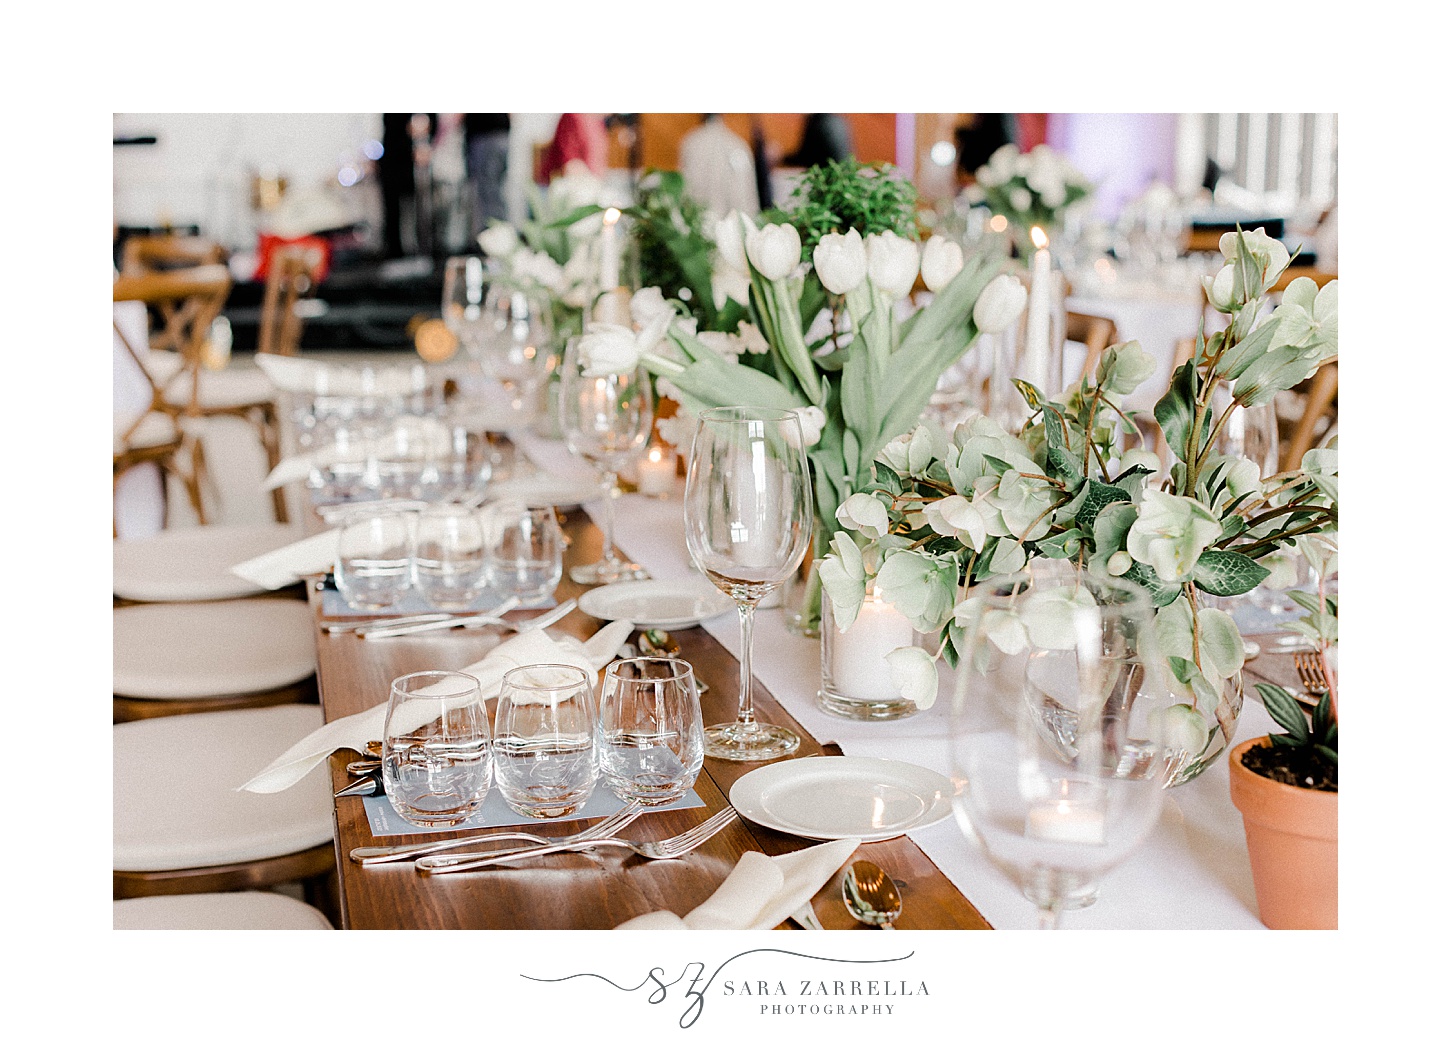 place settings with green and white plants in center